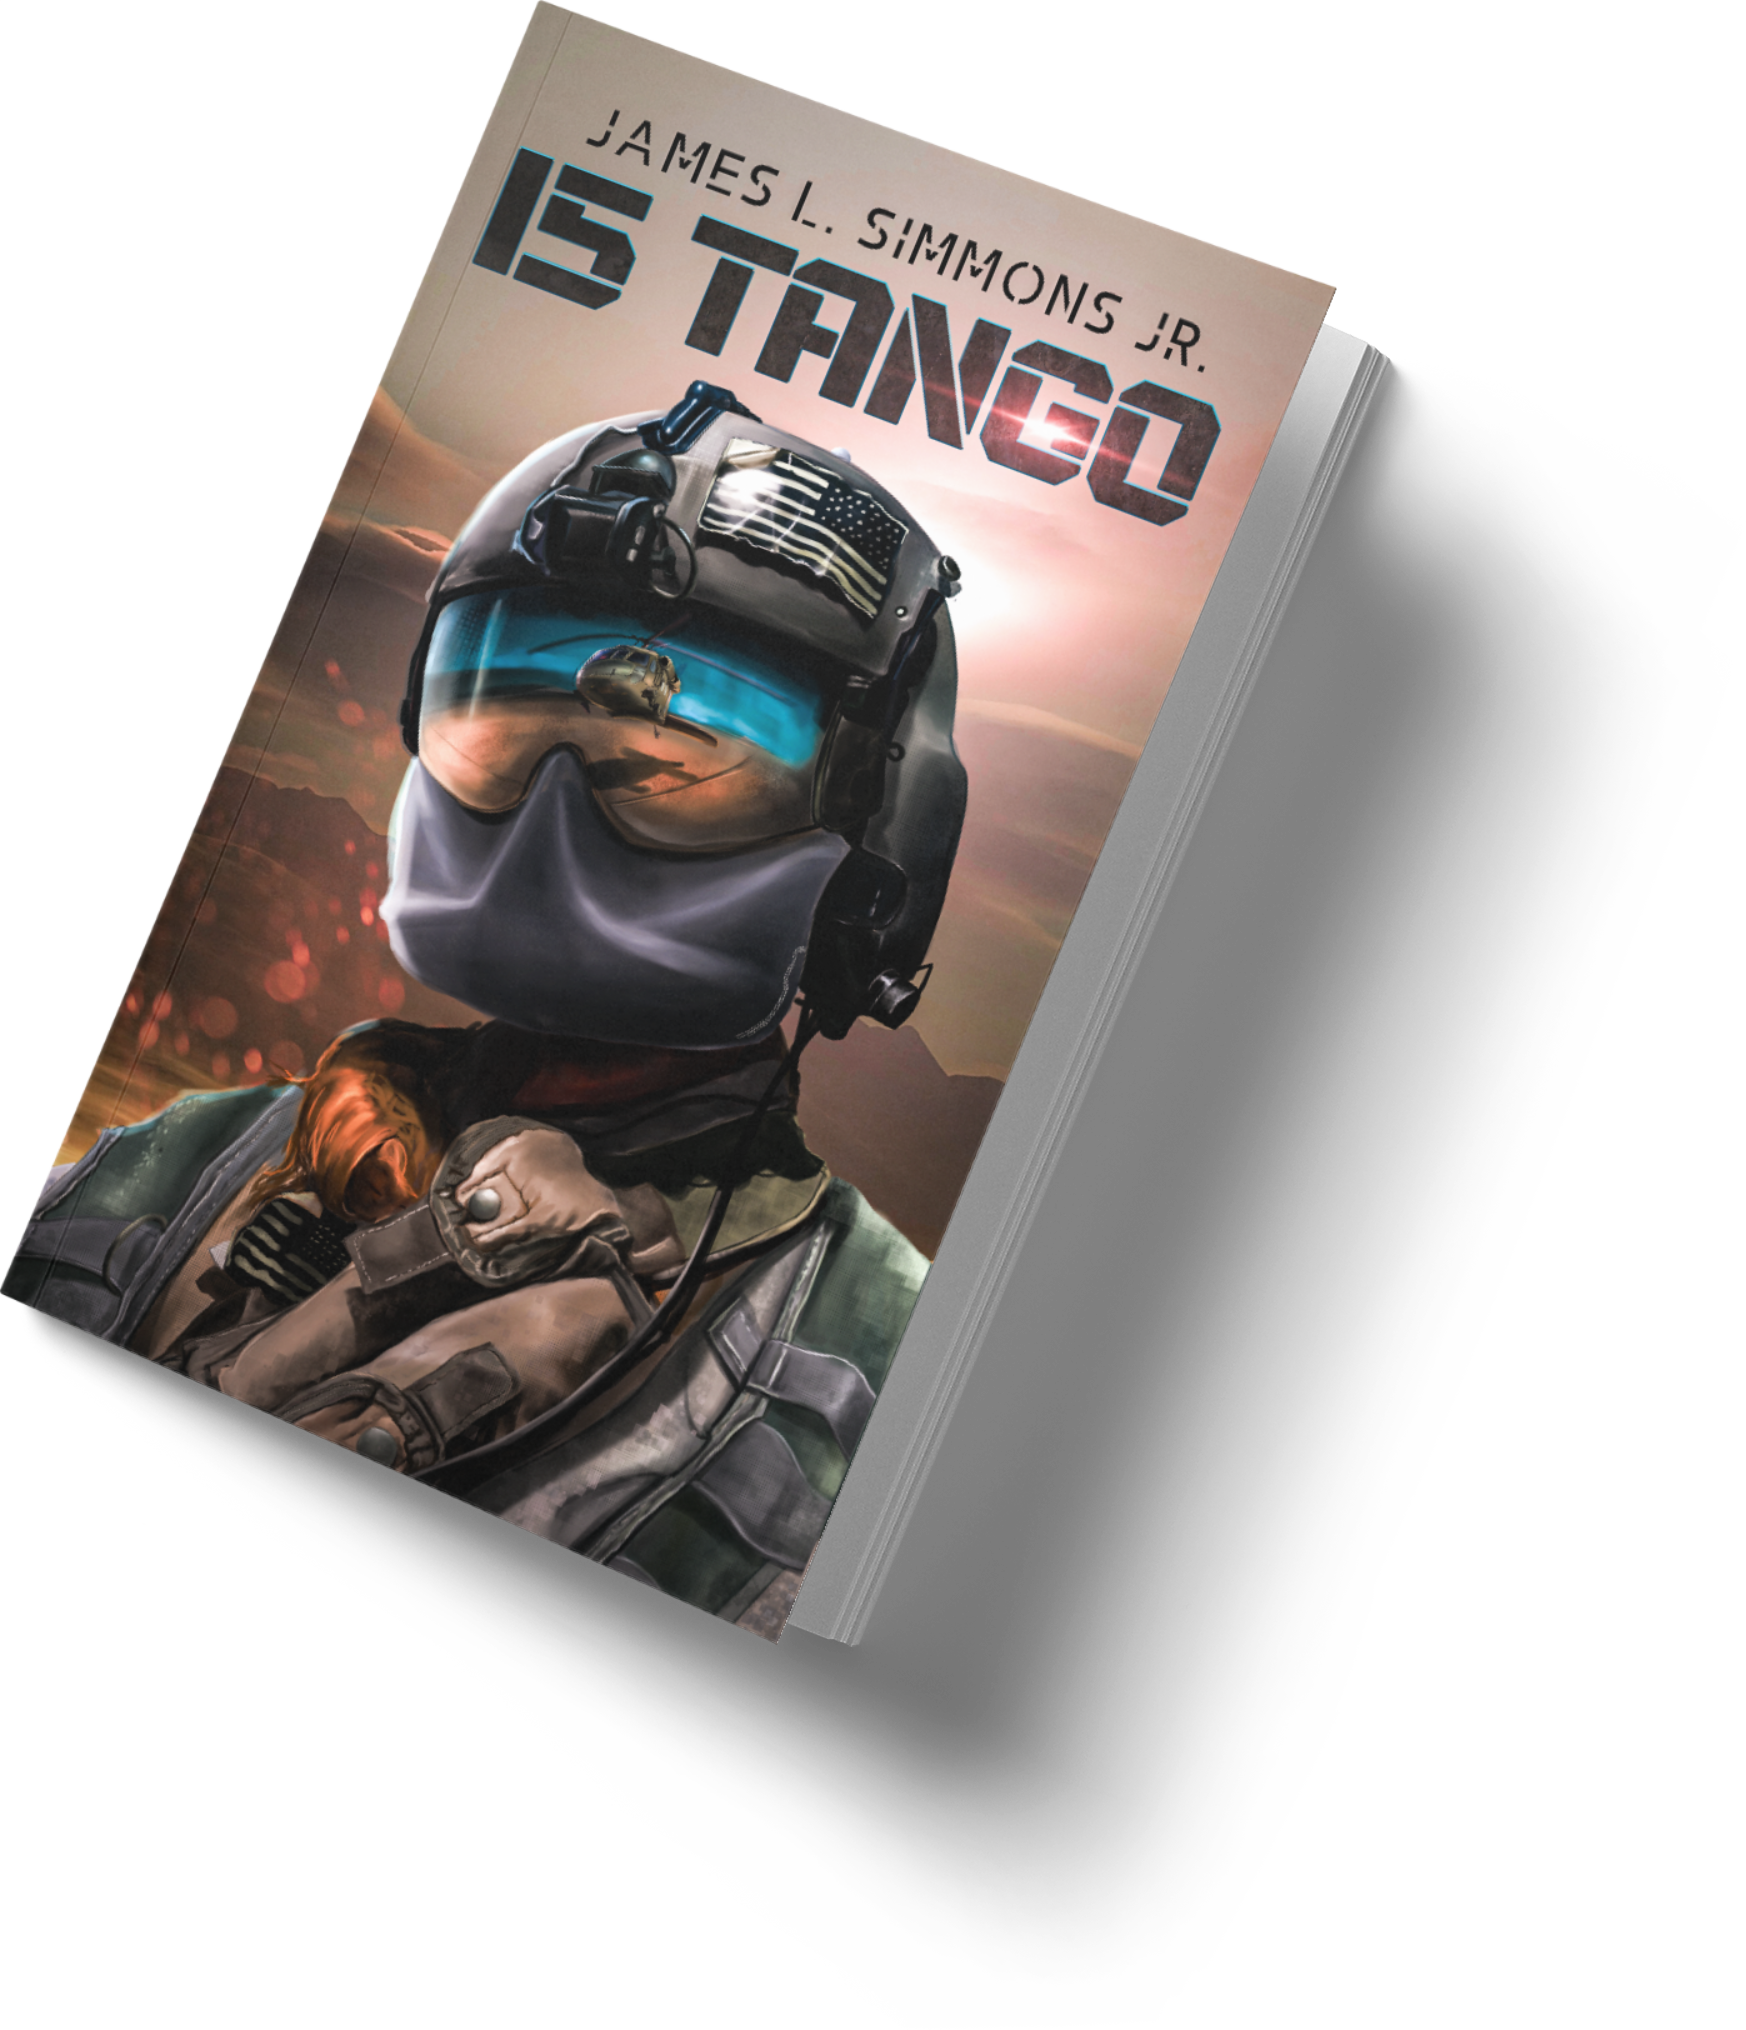 The "15 Tango" book invites readers on an exhilarating journey with U.S. Army Blackhawk Crew Chiefs and Maintainers, highlighting their courage, camaraderie, and the thrilling reality of military aviation.